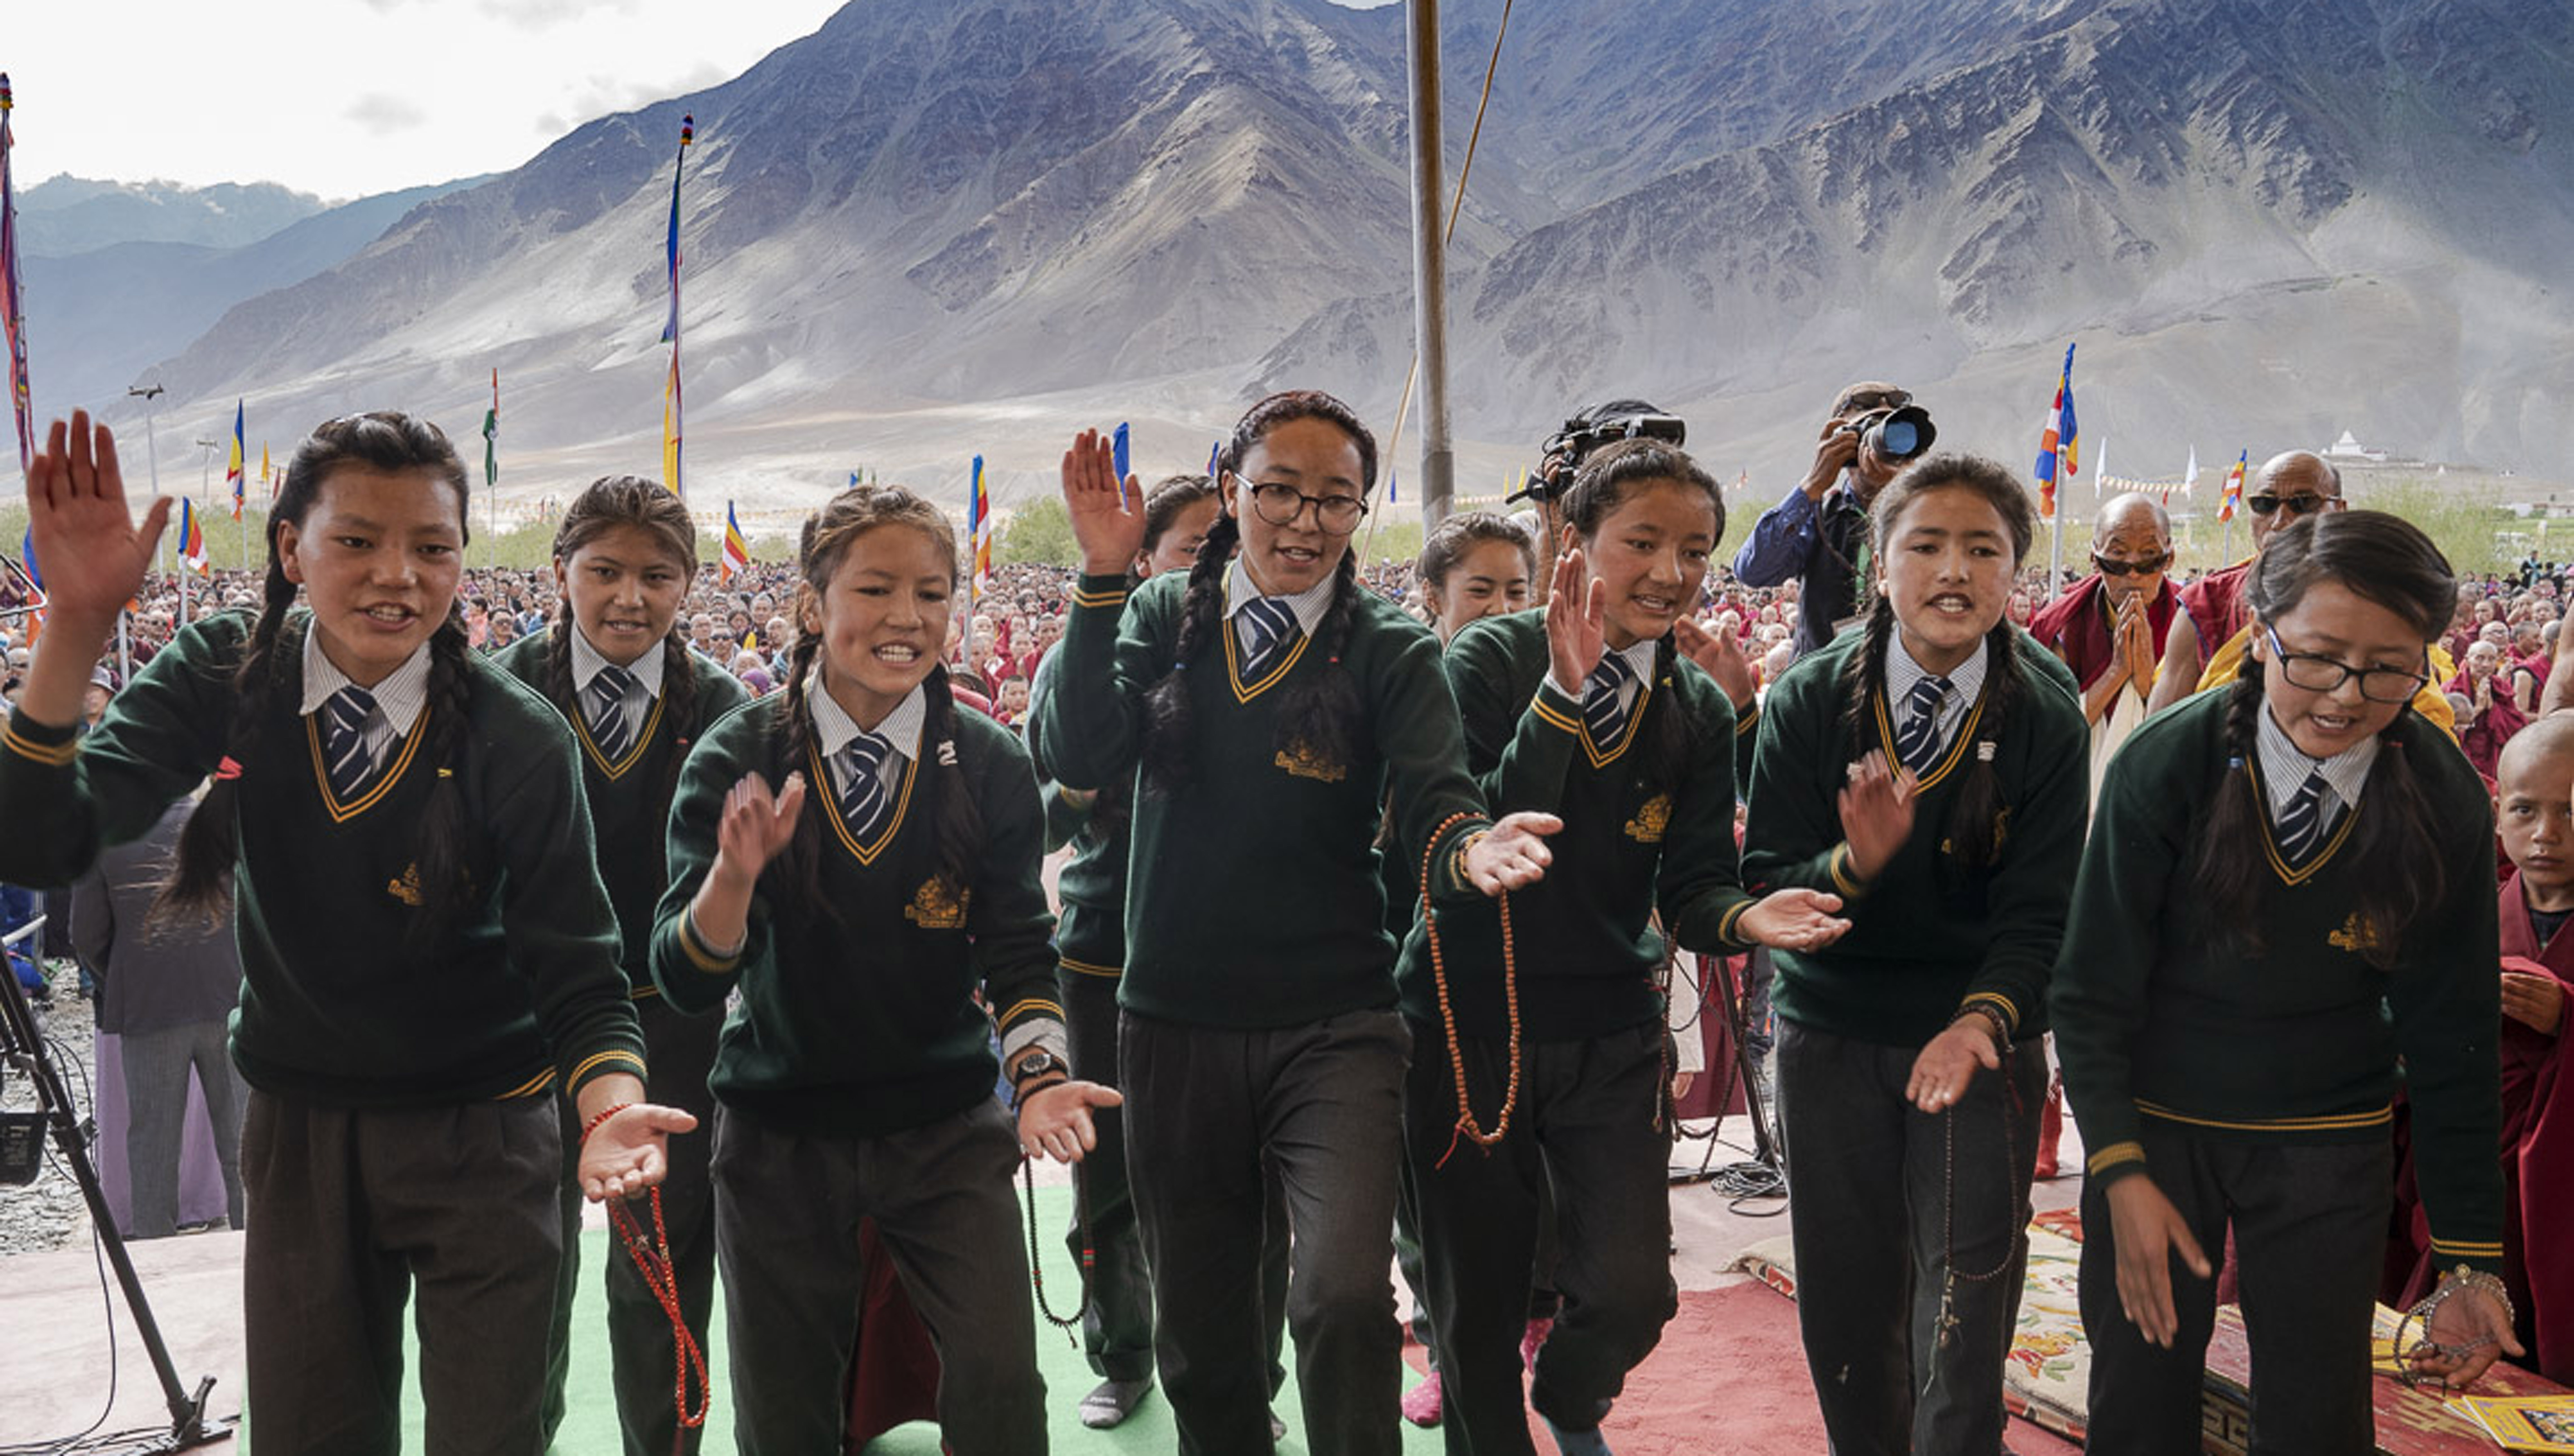 Girl students from the CBAC Branch School demonstrating philosophical debate as His Holiness the Dalai Lama arrives at the teaching venue in Padum, Zanskar, J&K, India on July 22, 2018. Photo by Tenzin Choejor